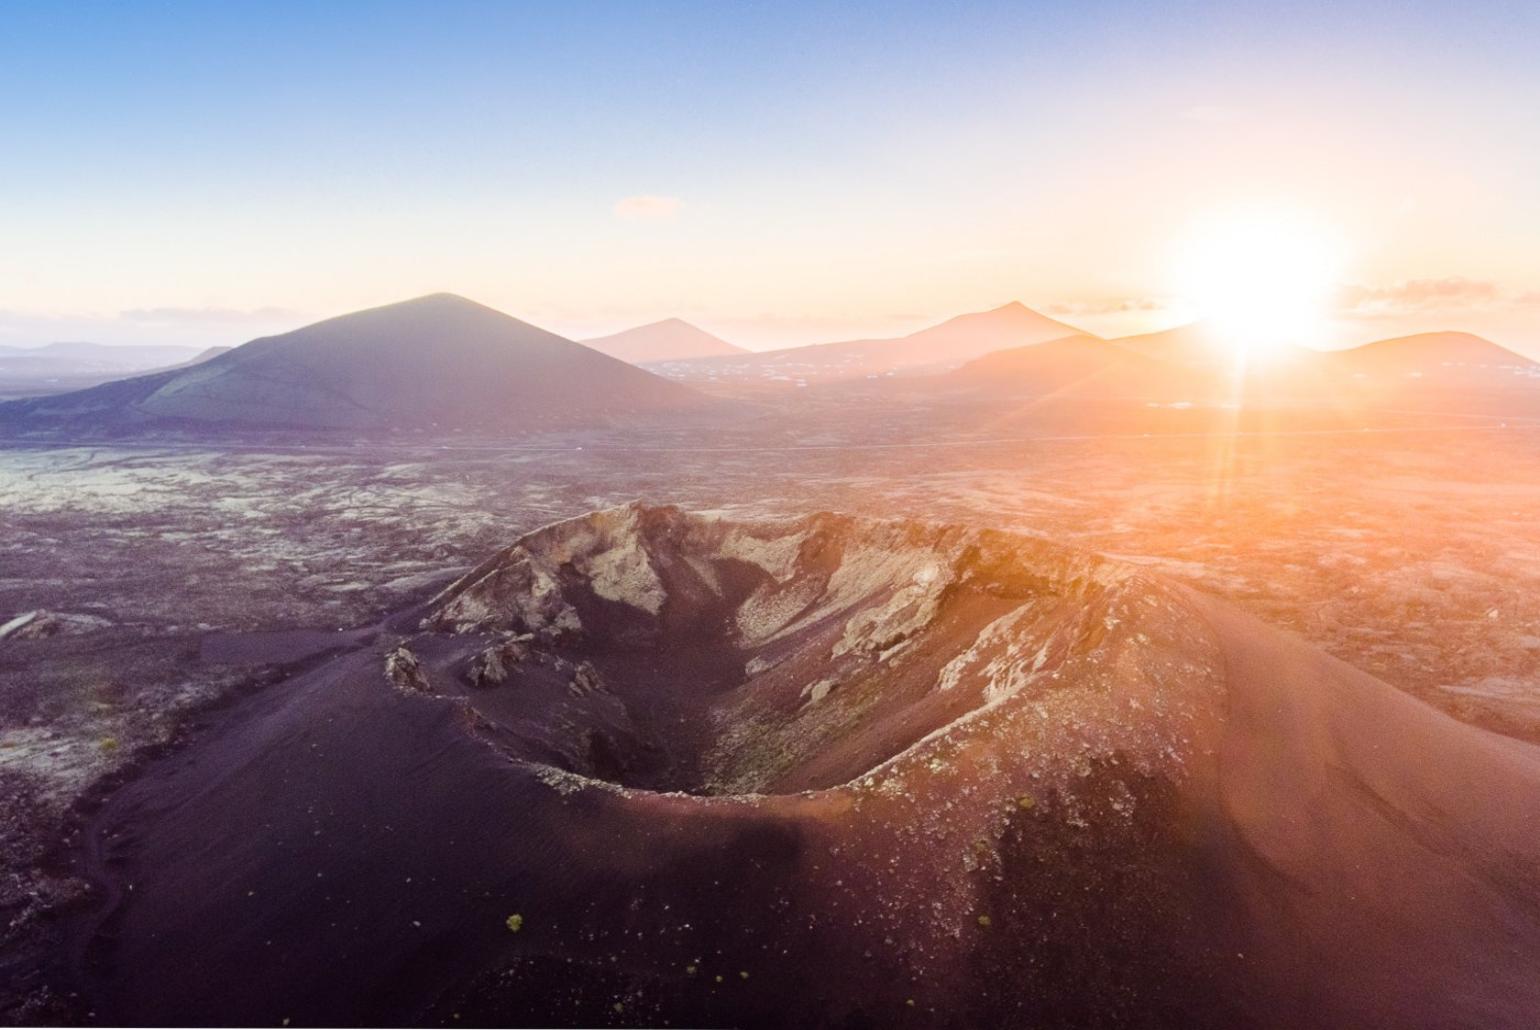 Sunrise over nearby Volcan el Cuervo